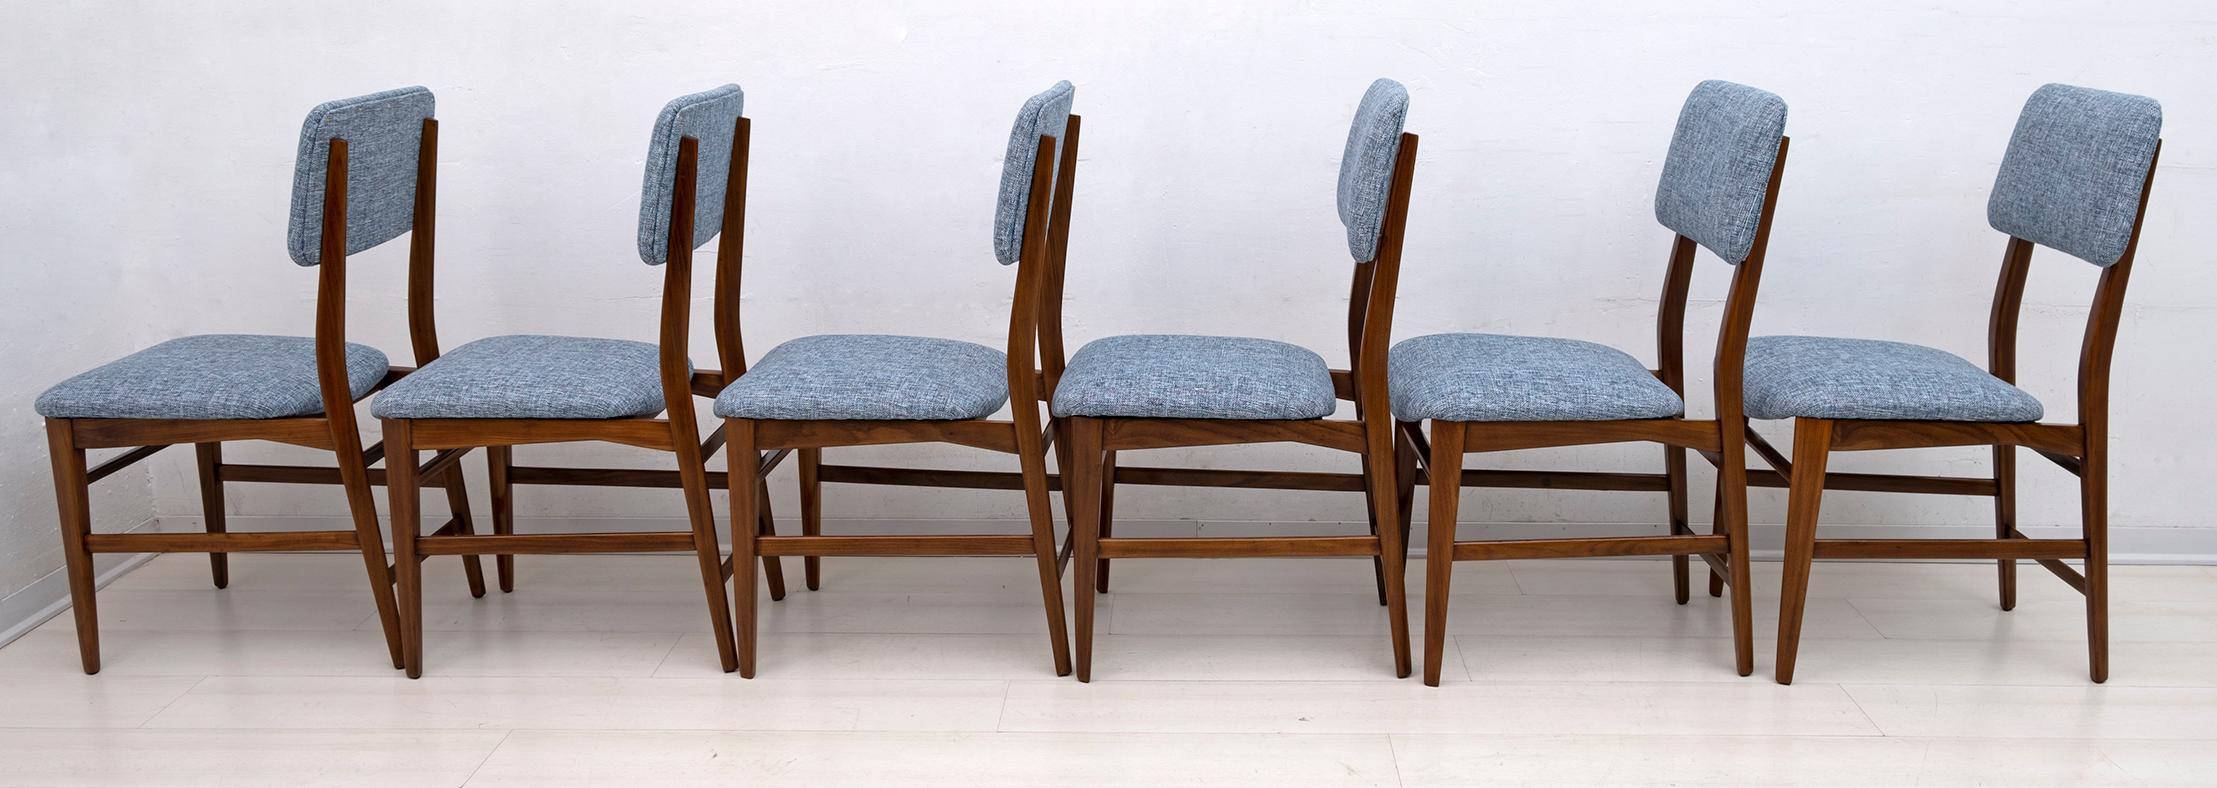 Edmondo Palutari for Dassi Mid-Century Italian Teak Dining Table and Chairs, 50s For Sale 3